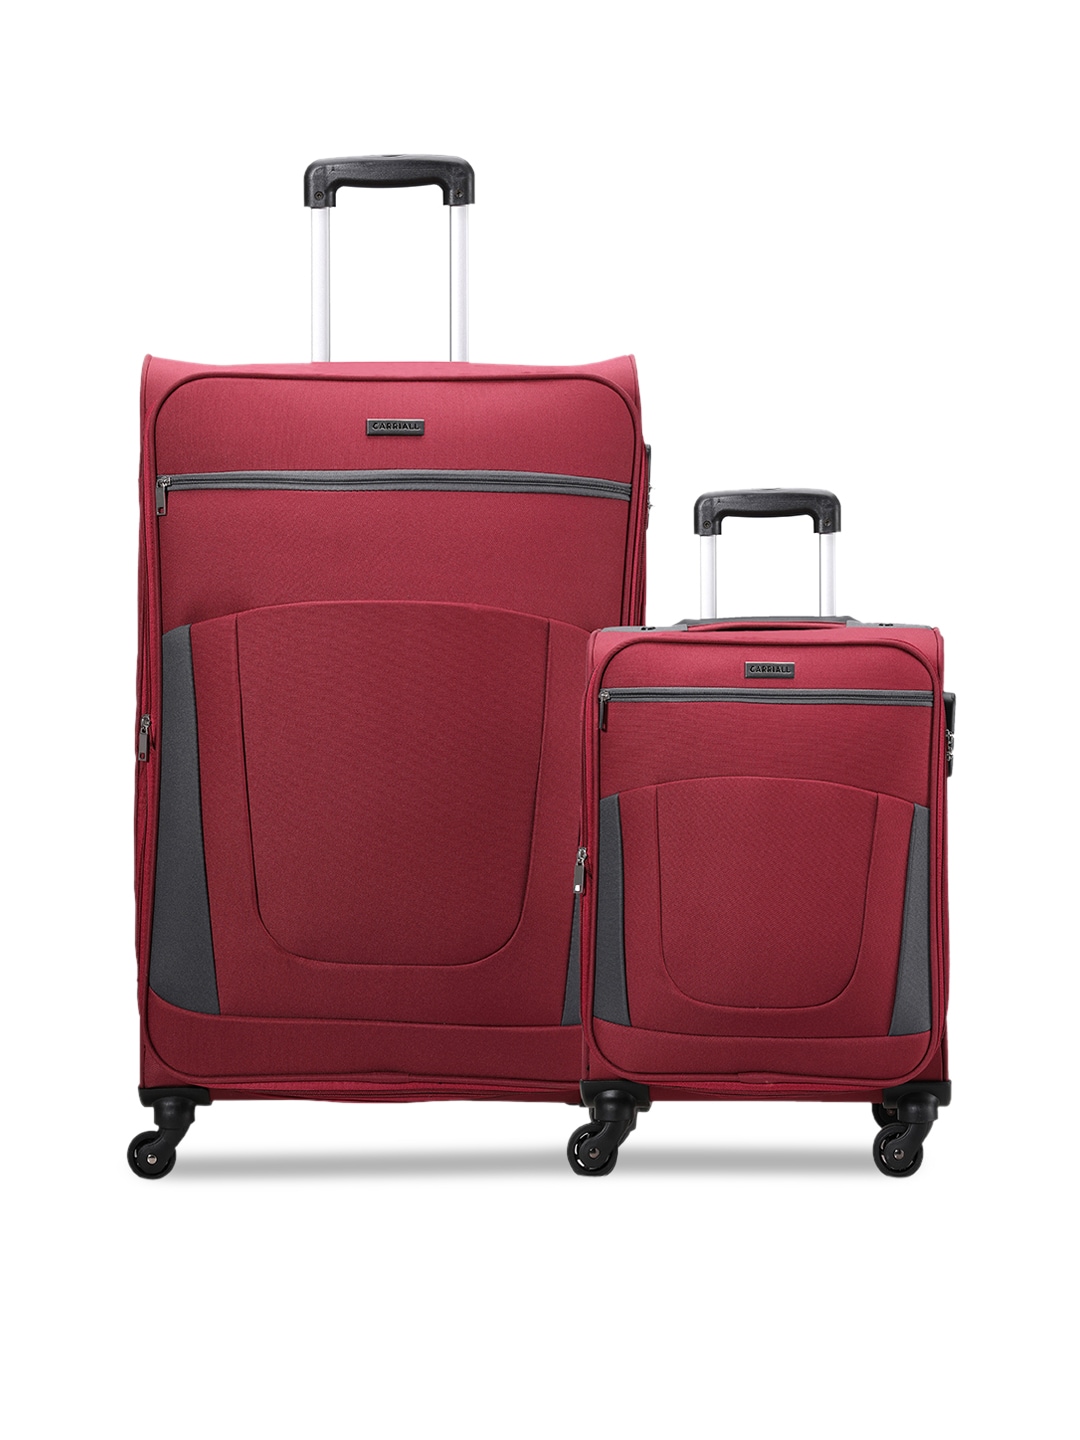 CARRIALL Set of 2 Red Luggage Bags- Large & Small Price in India